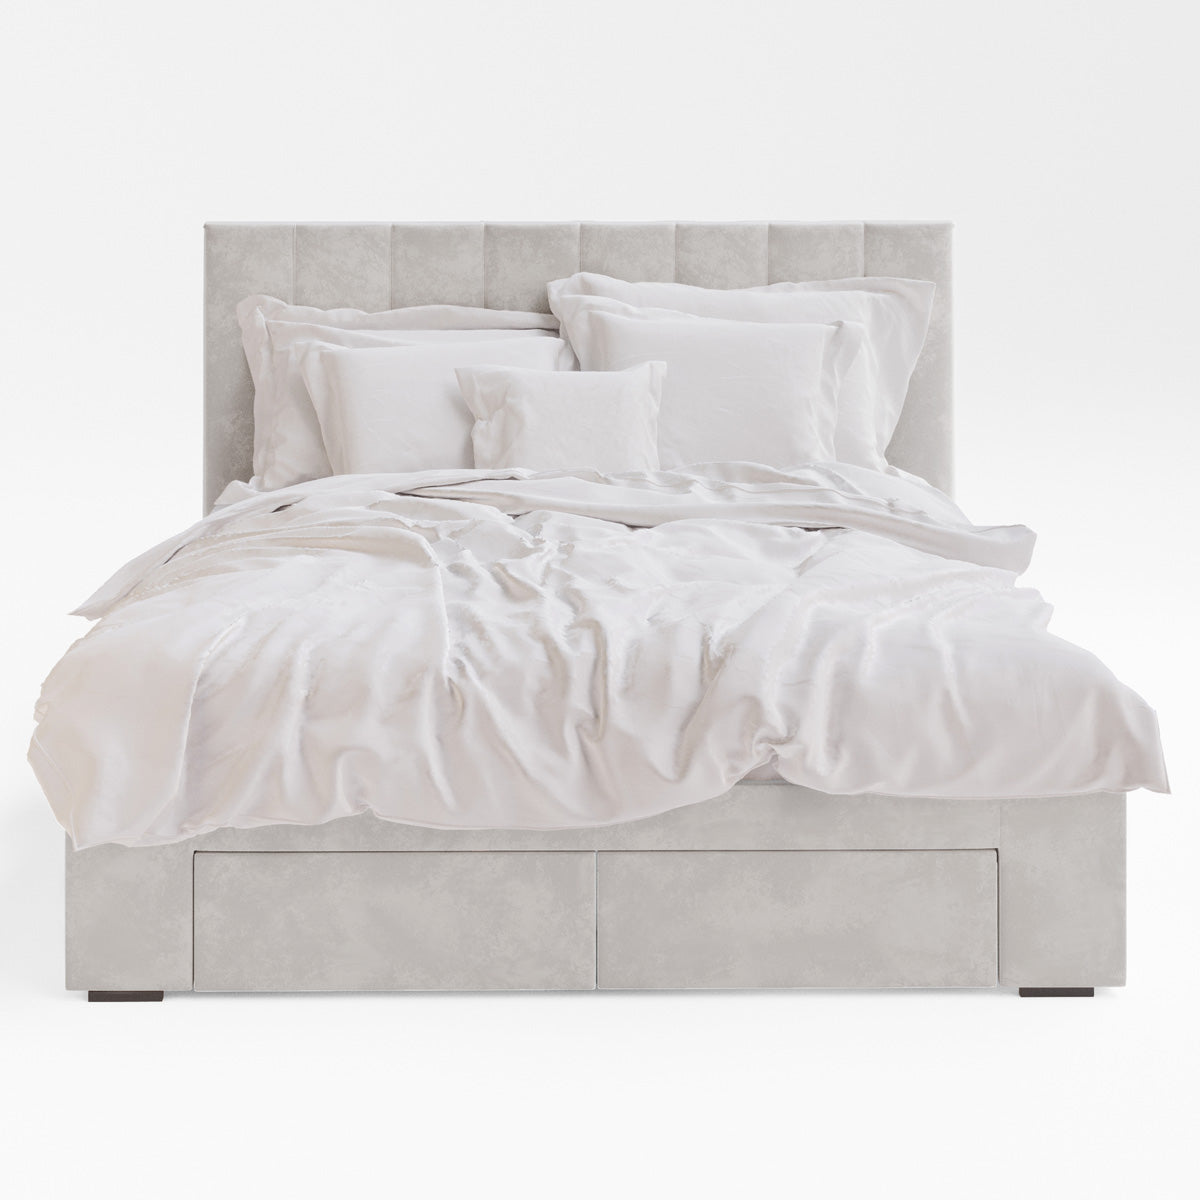 Ormond Storage Bed Frame with Four Extra Large Drawers (Taupe White Velvet)